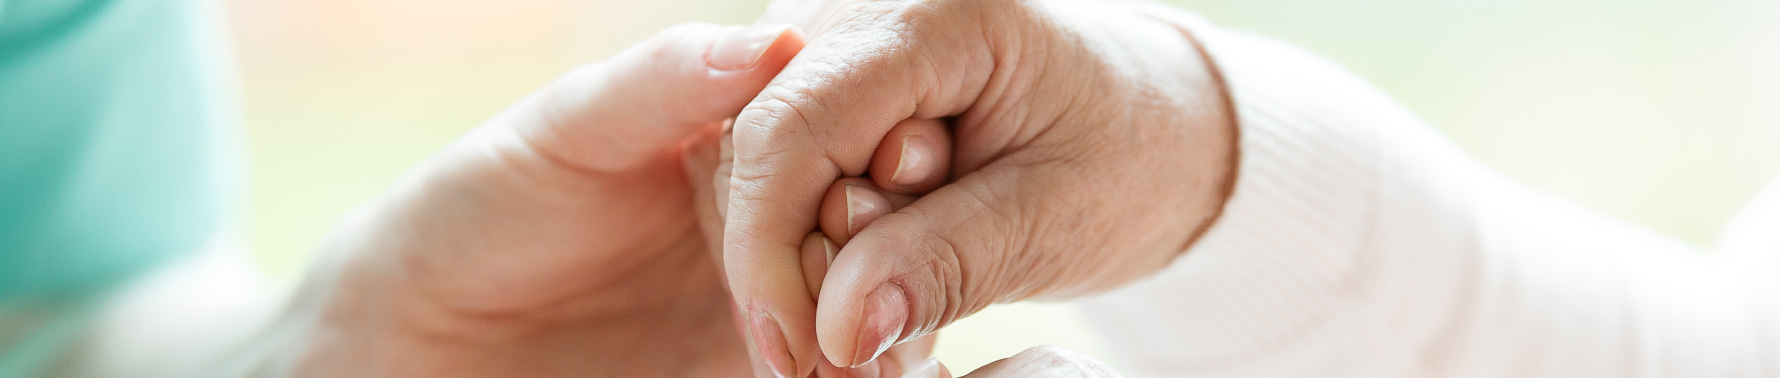 caring hands in the senior healthcare field